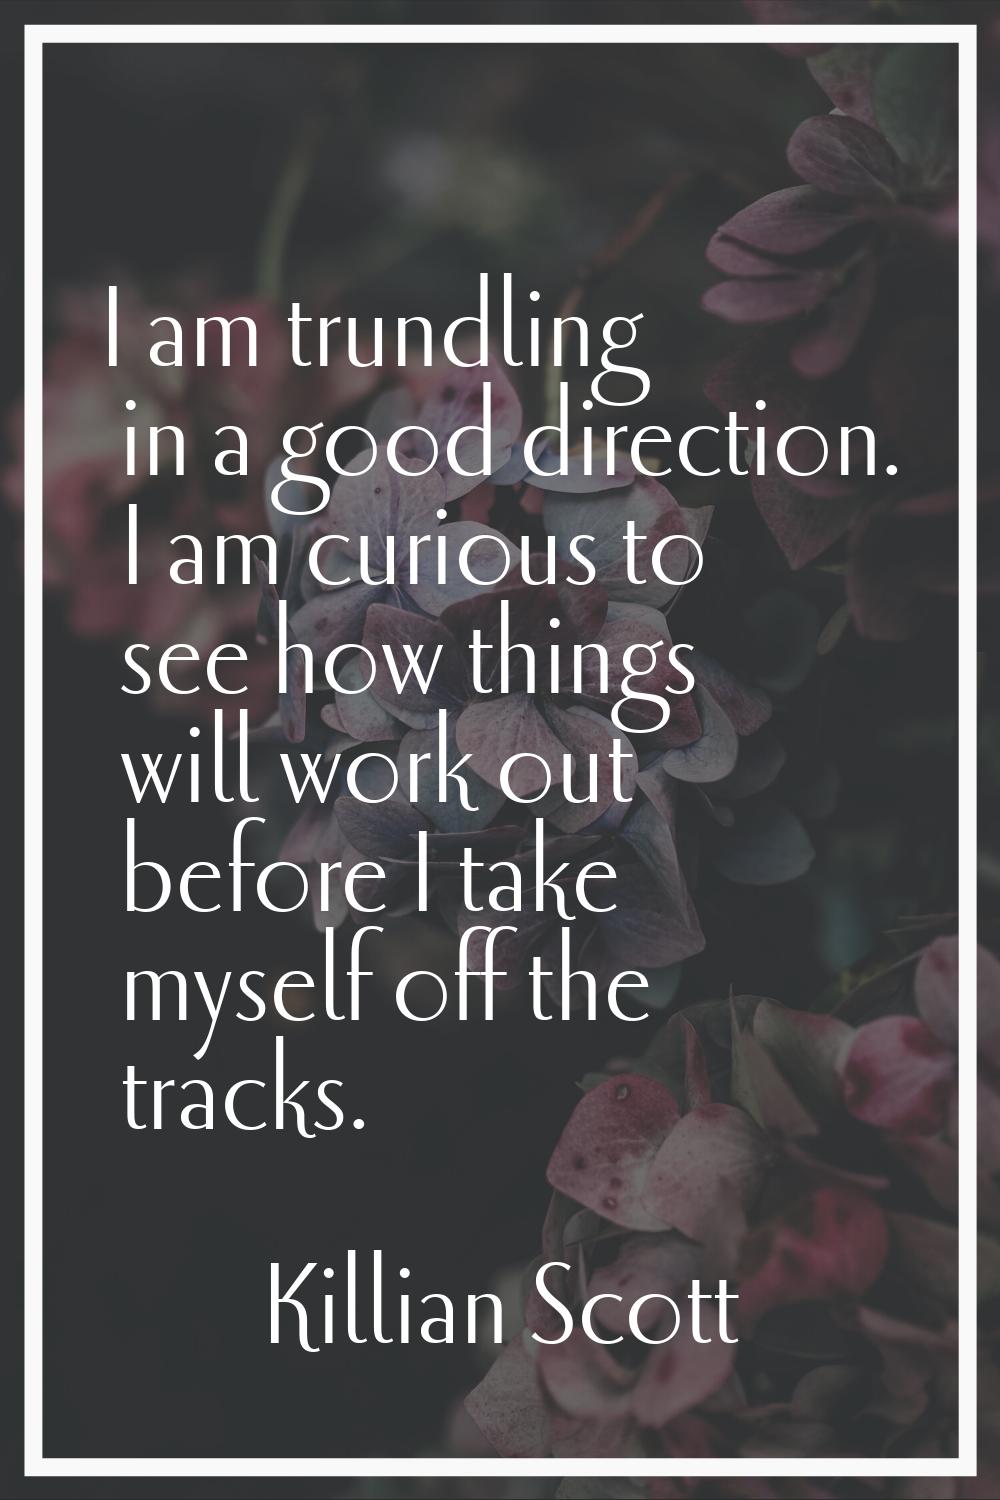 I am trundling in a good direction. I am curious to see how things will work out before I take myse